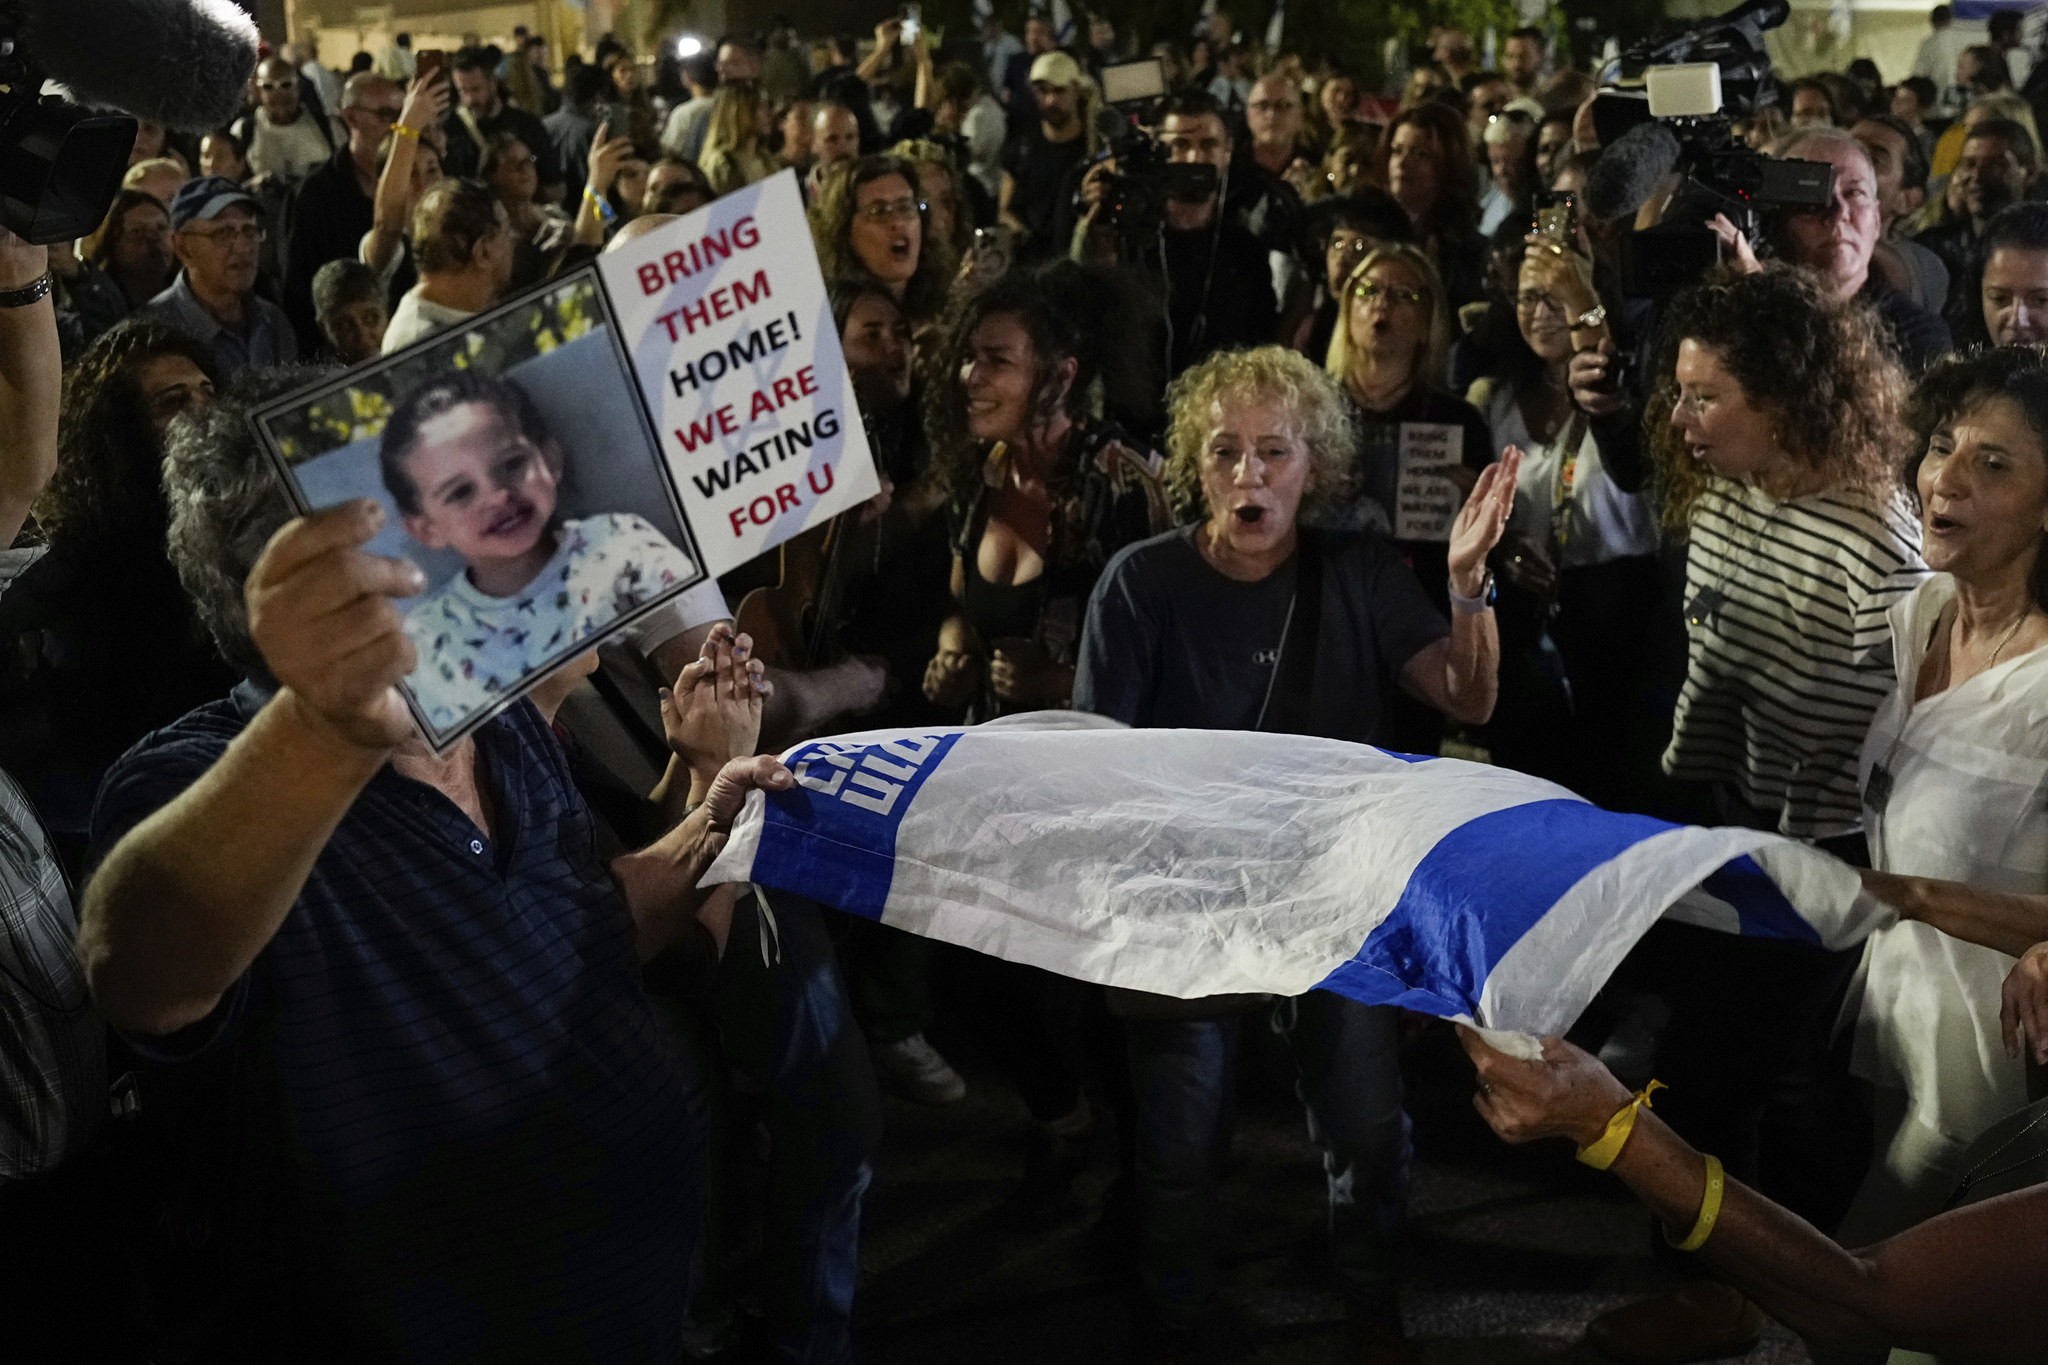 People react as they hear the news of the release of 13 Israeli hostage